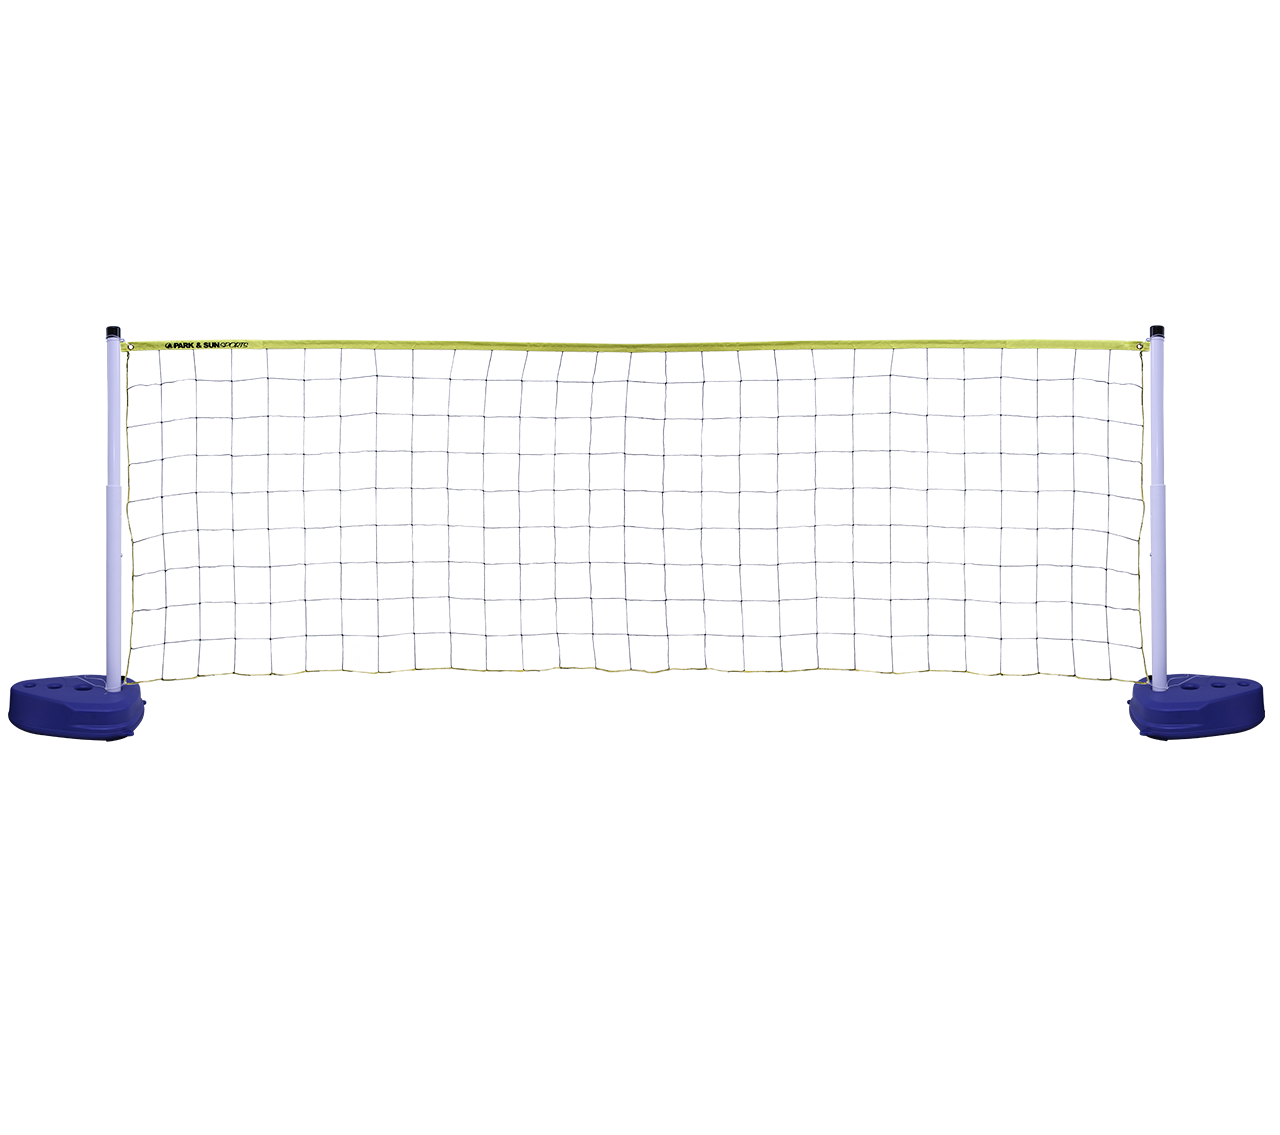 Volleyball Ball And Net PNG - 154833